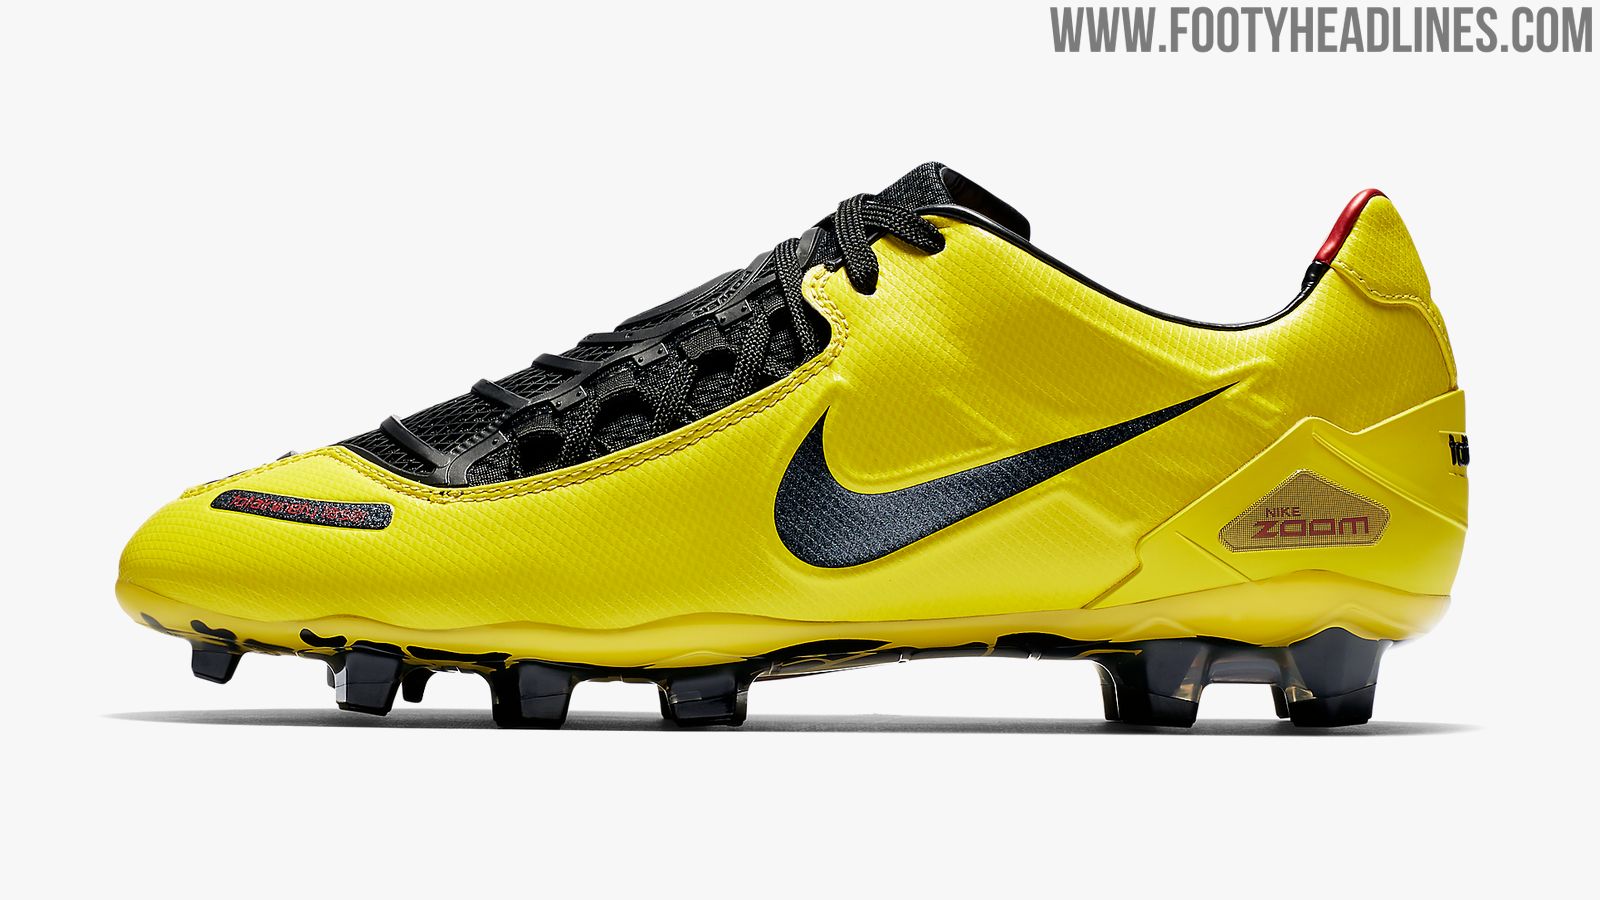 Ambiente superficial Circular Nike Total 90 Laser I 2019 Remake Boots Released - Footy Headlines